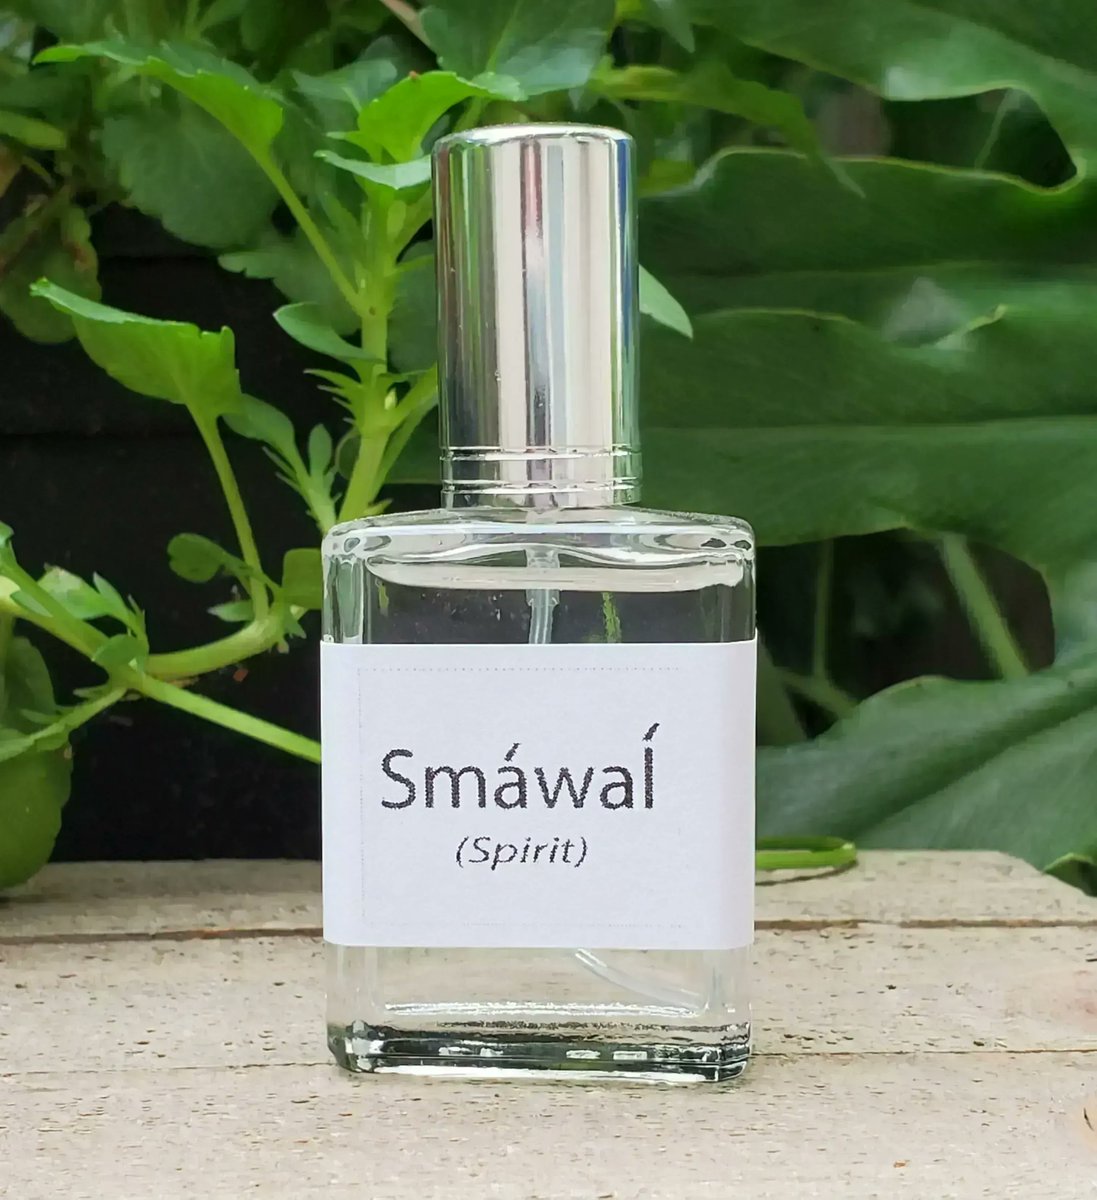 Smáwal̓ - spirit. A tribute to our Ancestors & Creator, about a year in the making... eau de parfum w/ top notes of smoke & sage, middle note of sweetgrass, base tobacco & cedar. Available @ lovealaskadesign.bigcartel.com 🌿 #NativeTwitter #FirstNations #AlaskaNative #NativeMade